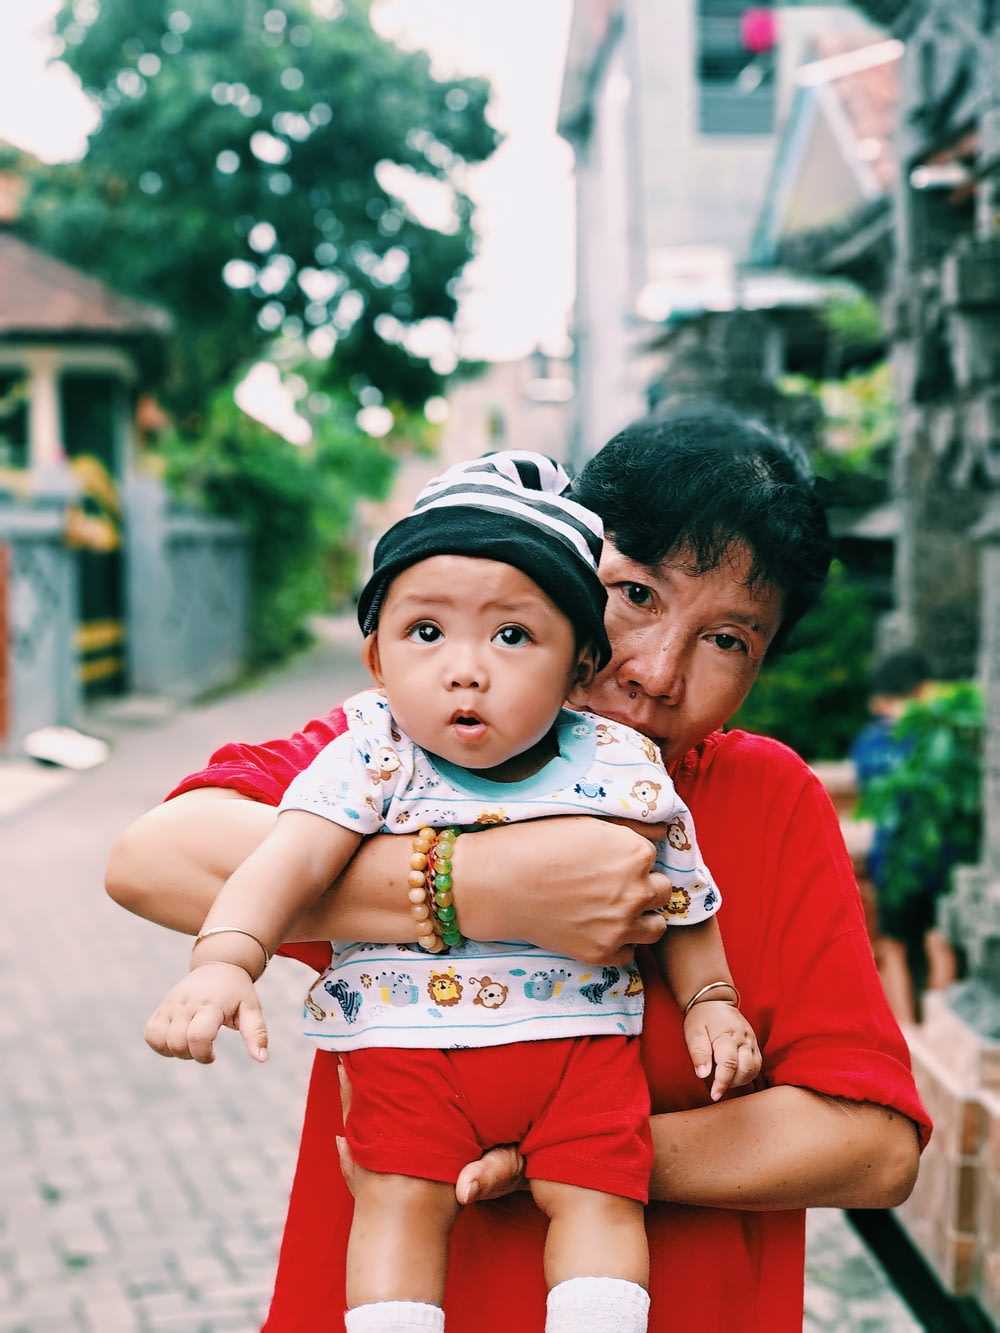 girl wearing red shirt carrying baby outdoor during daytime